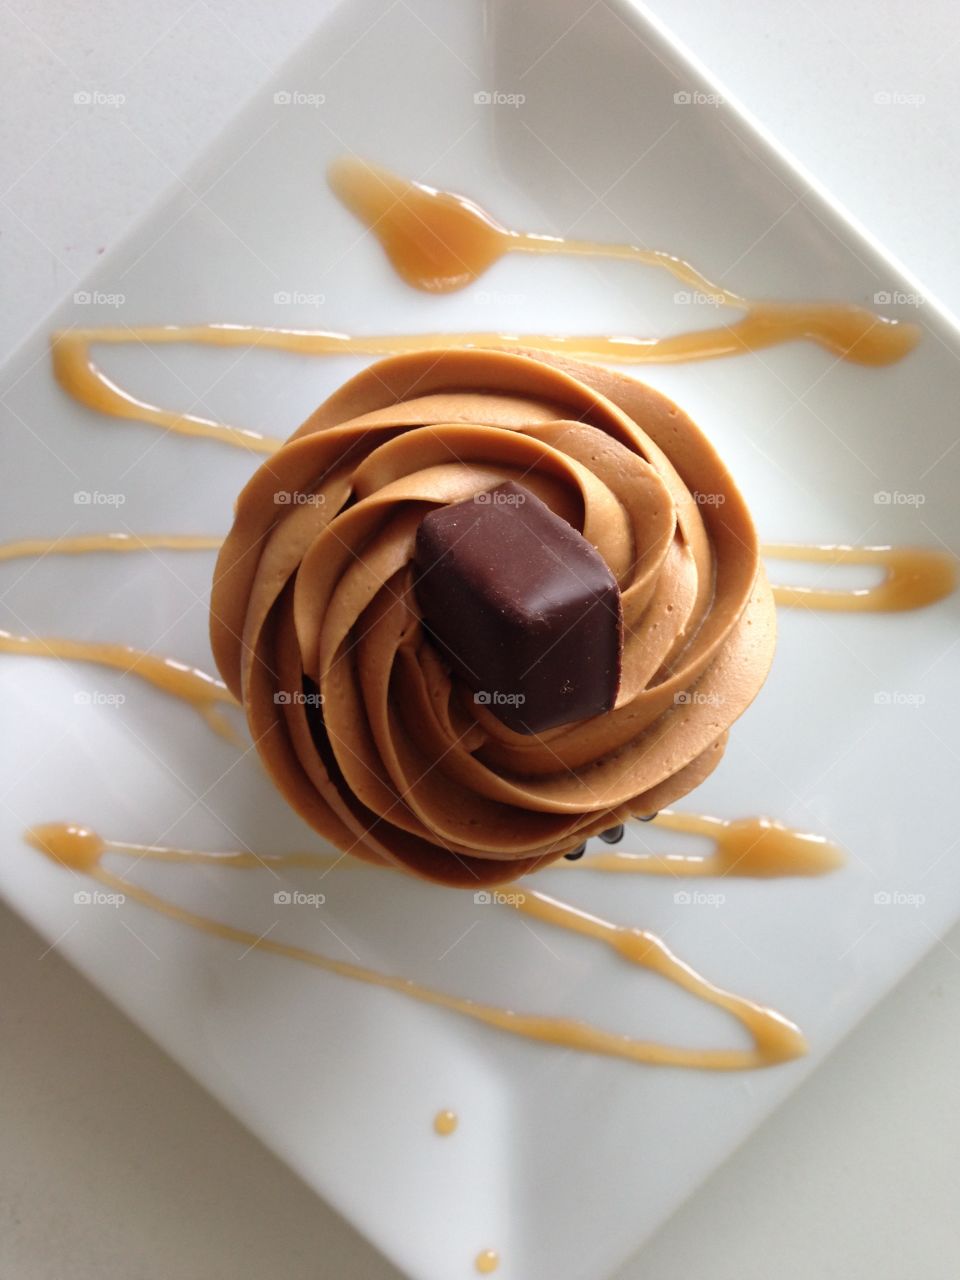 Chocolate cupcake with caramel frosting 